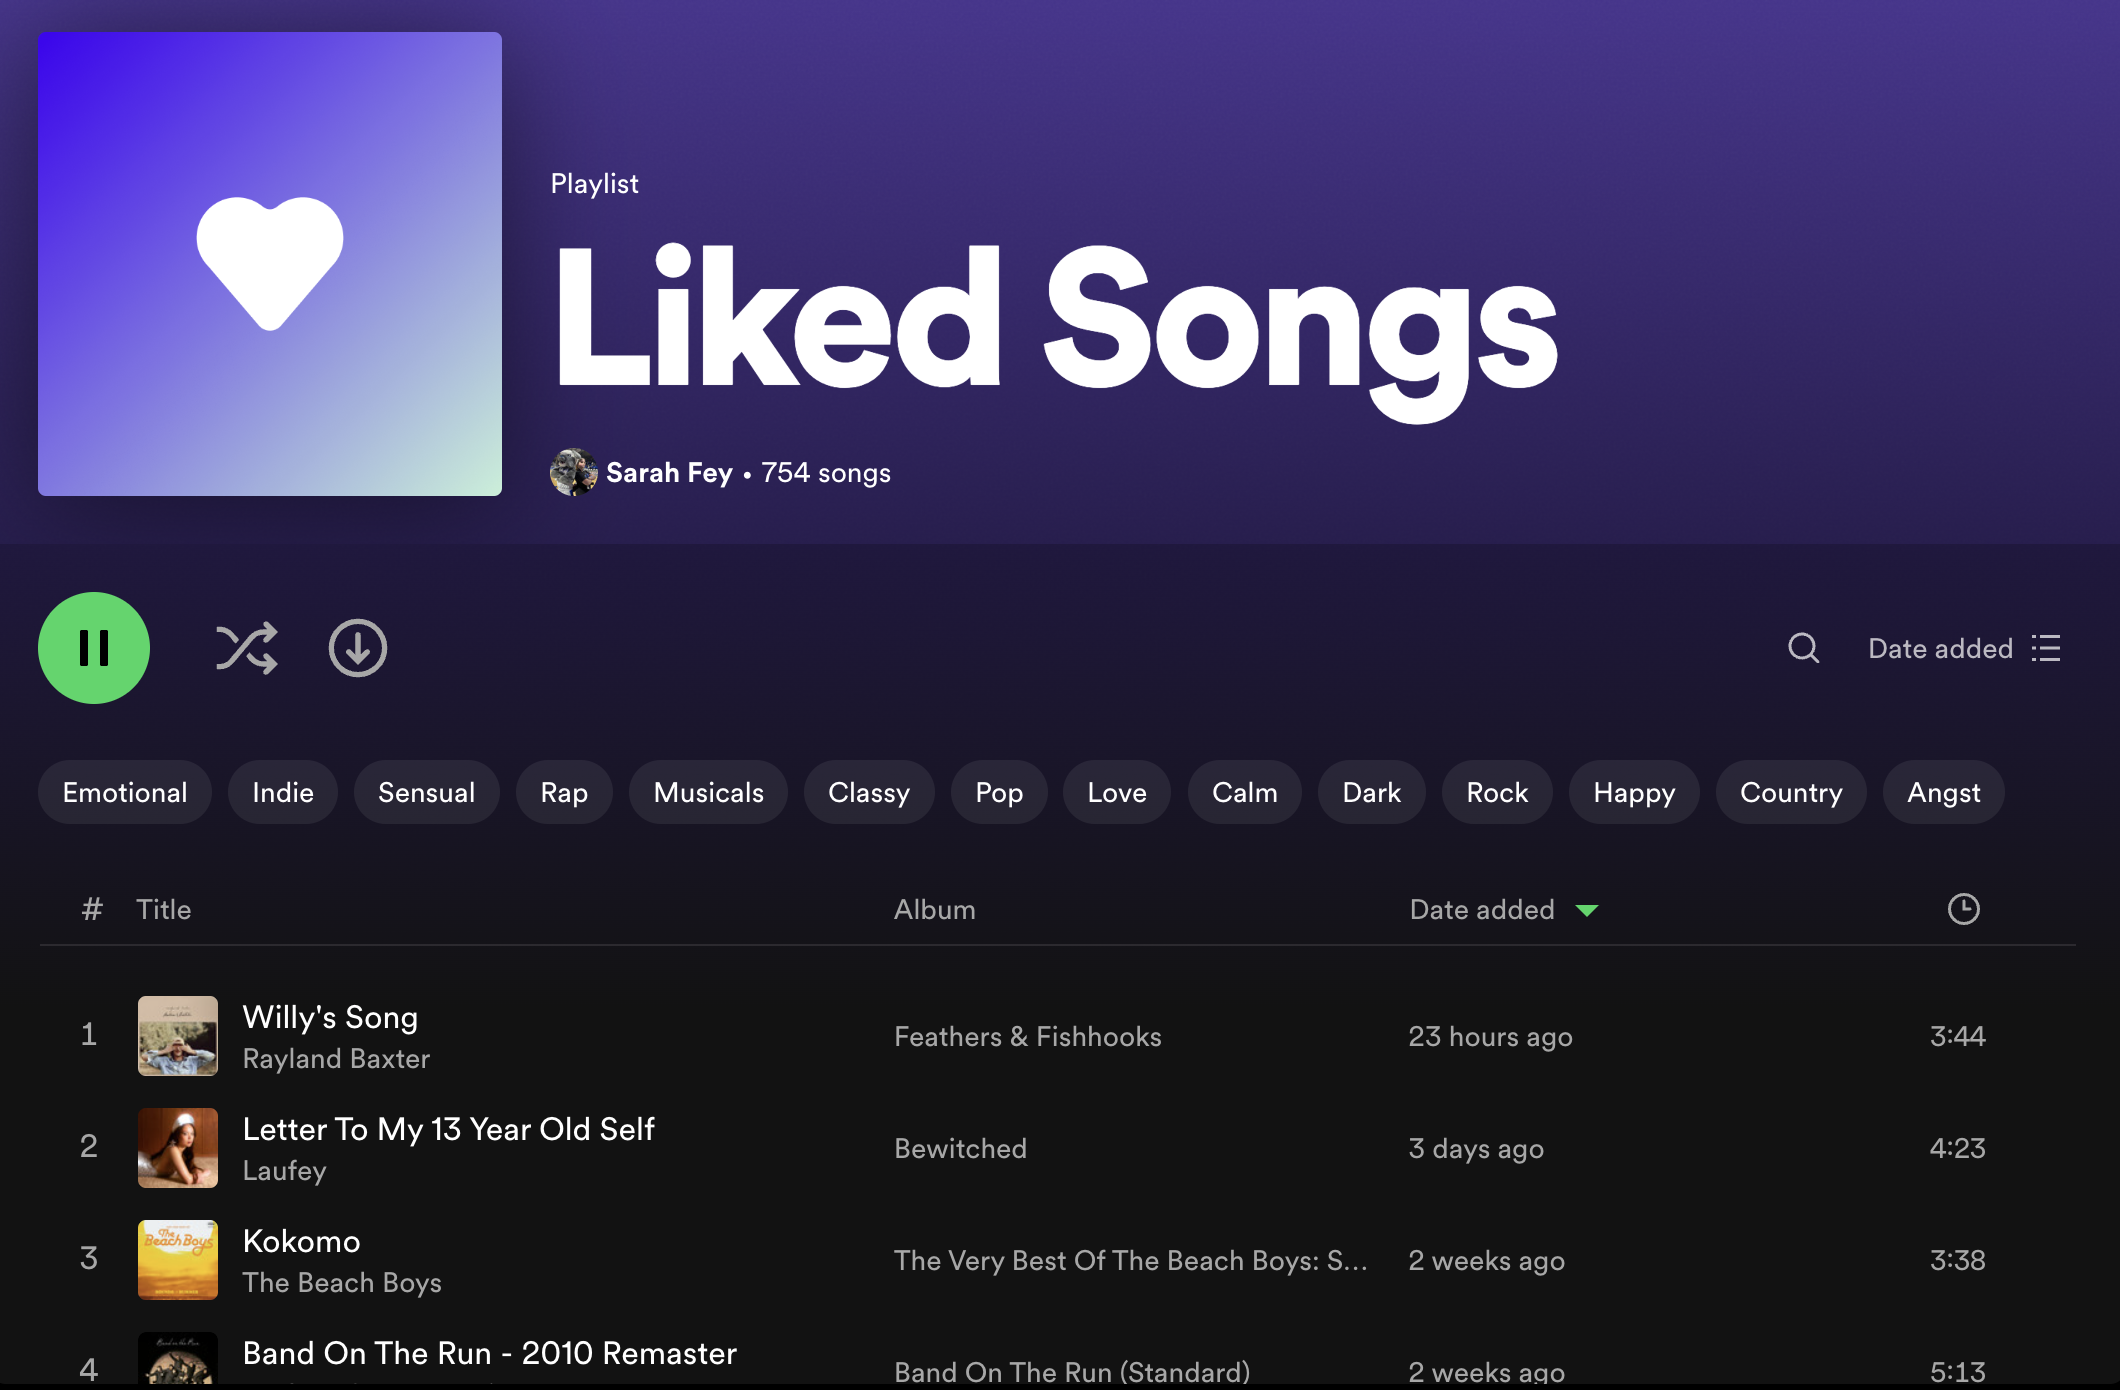 My Most Recent Liked Songs on Spotify